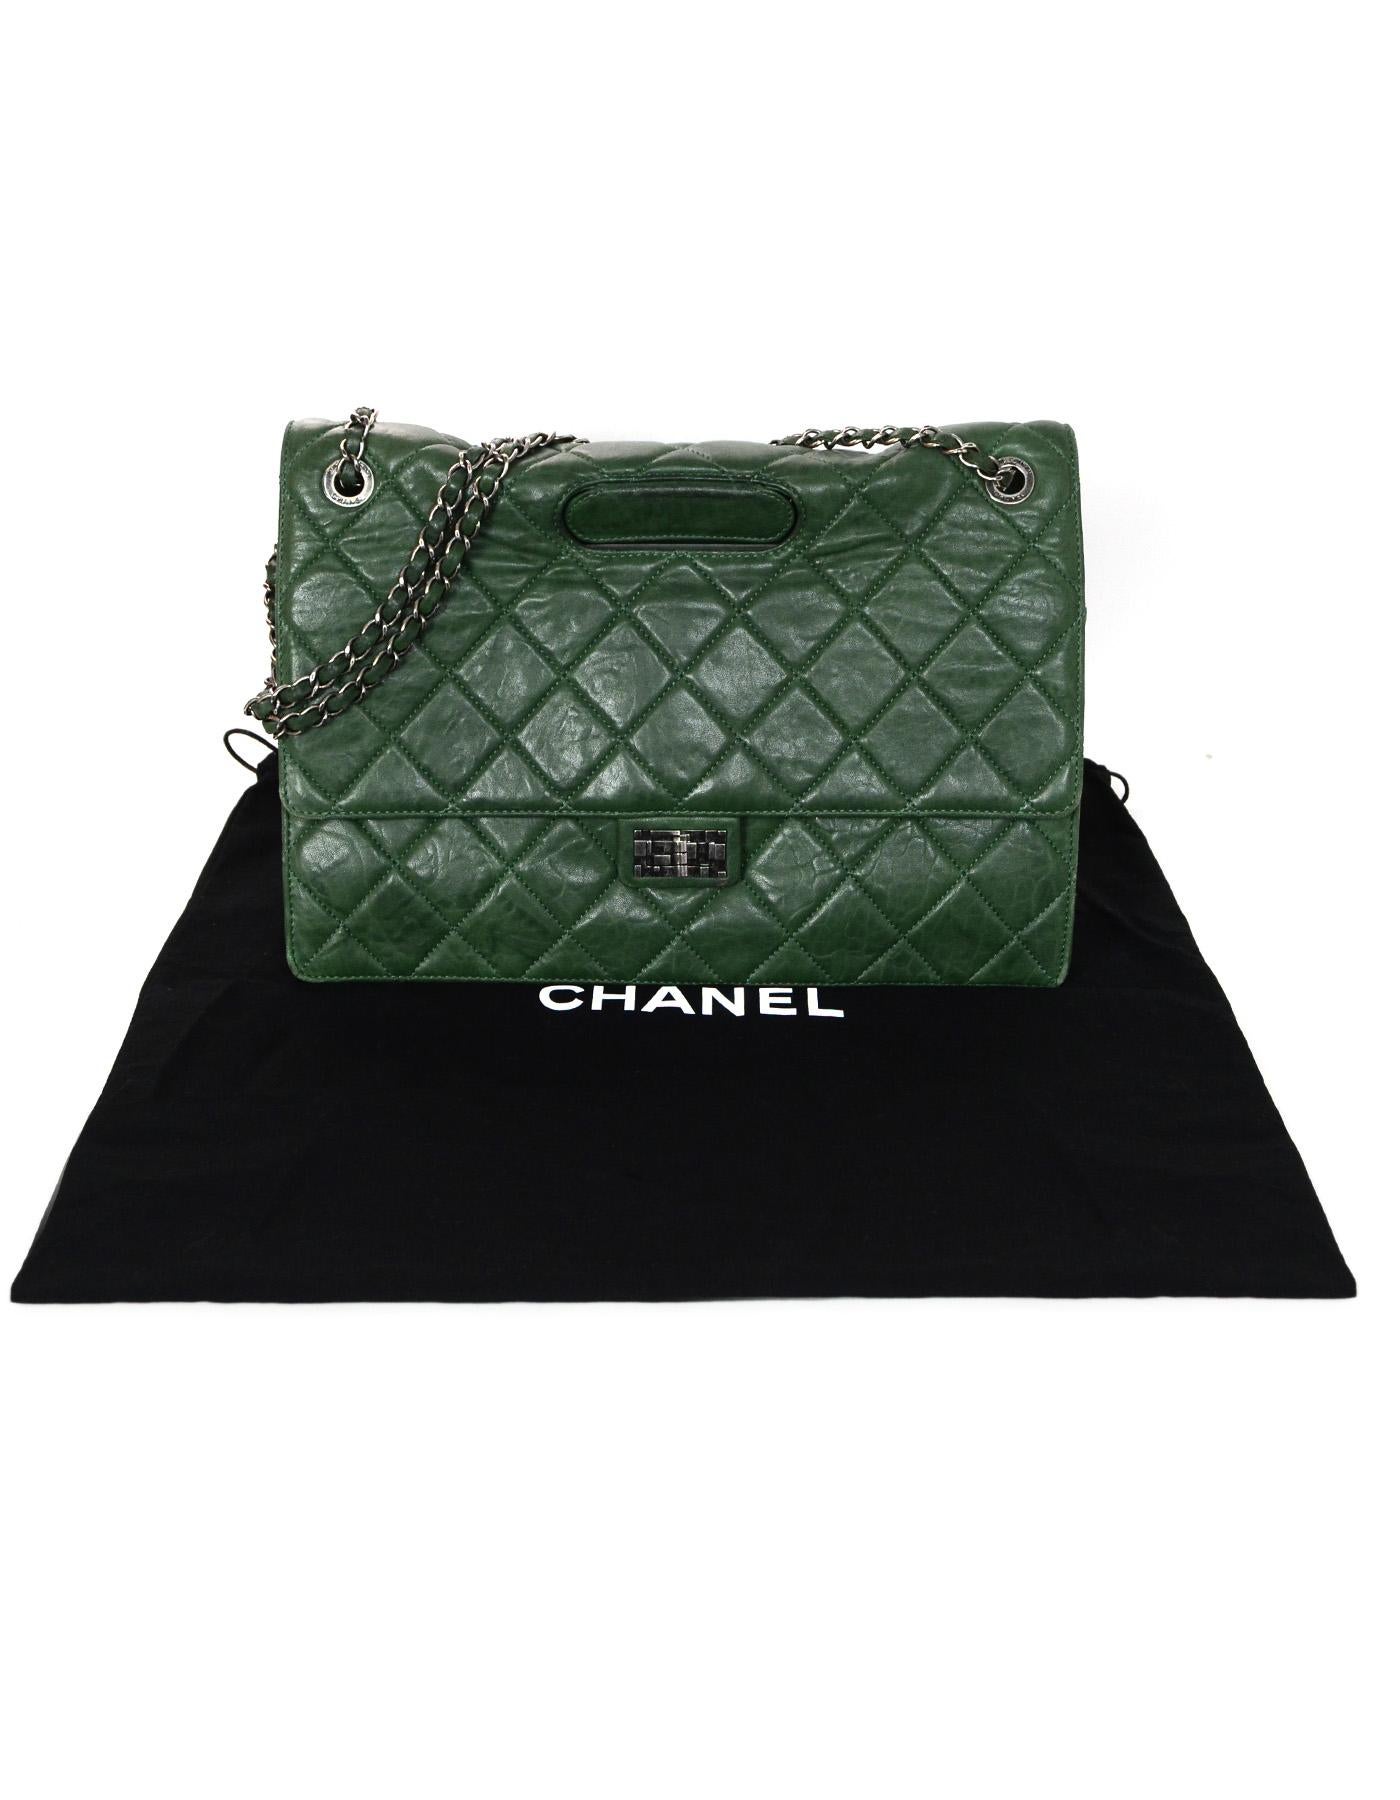 Chanel Green Calf Leather Quilted Paris-Byzance Take Away 2.55 Reissue Flap Bag  4